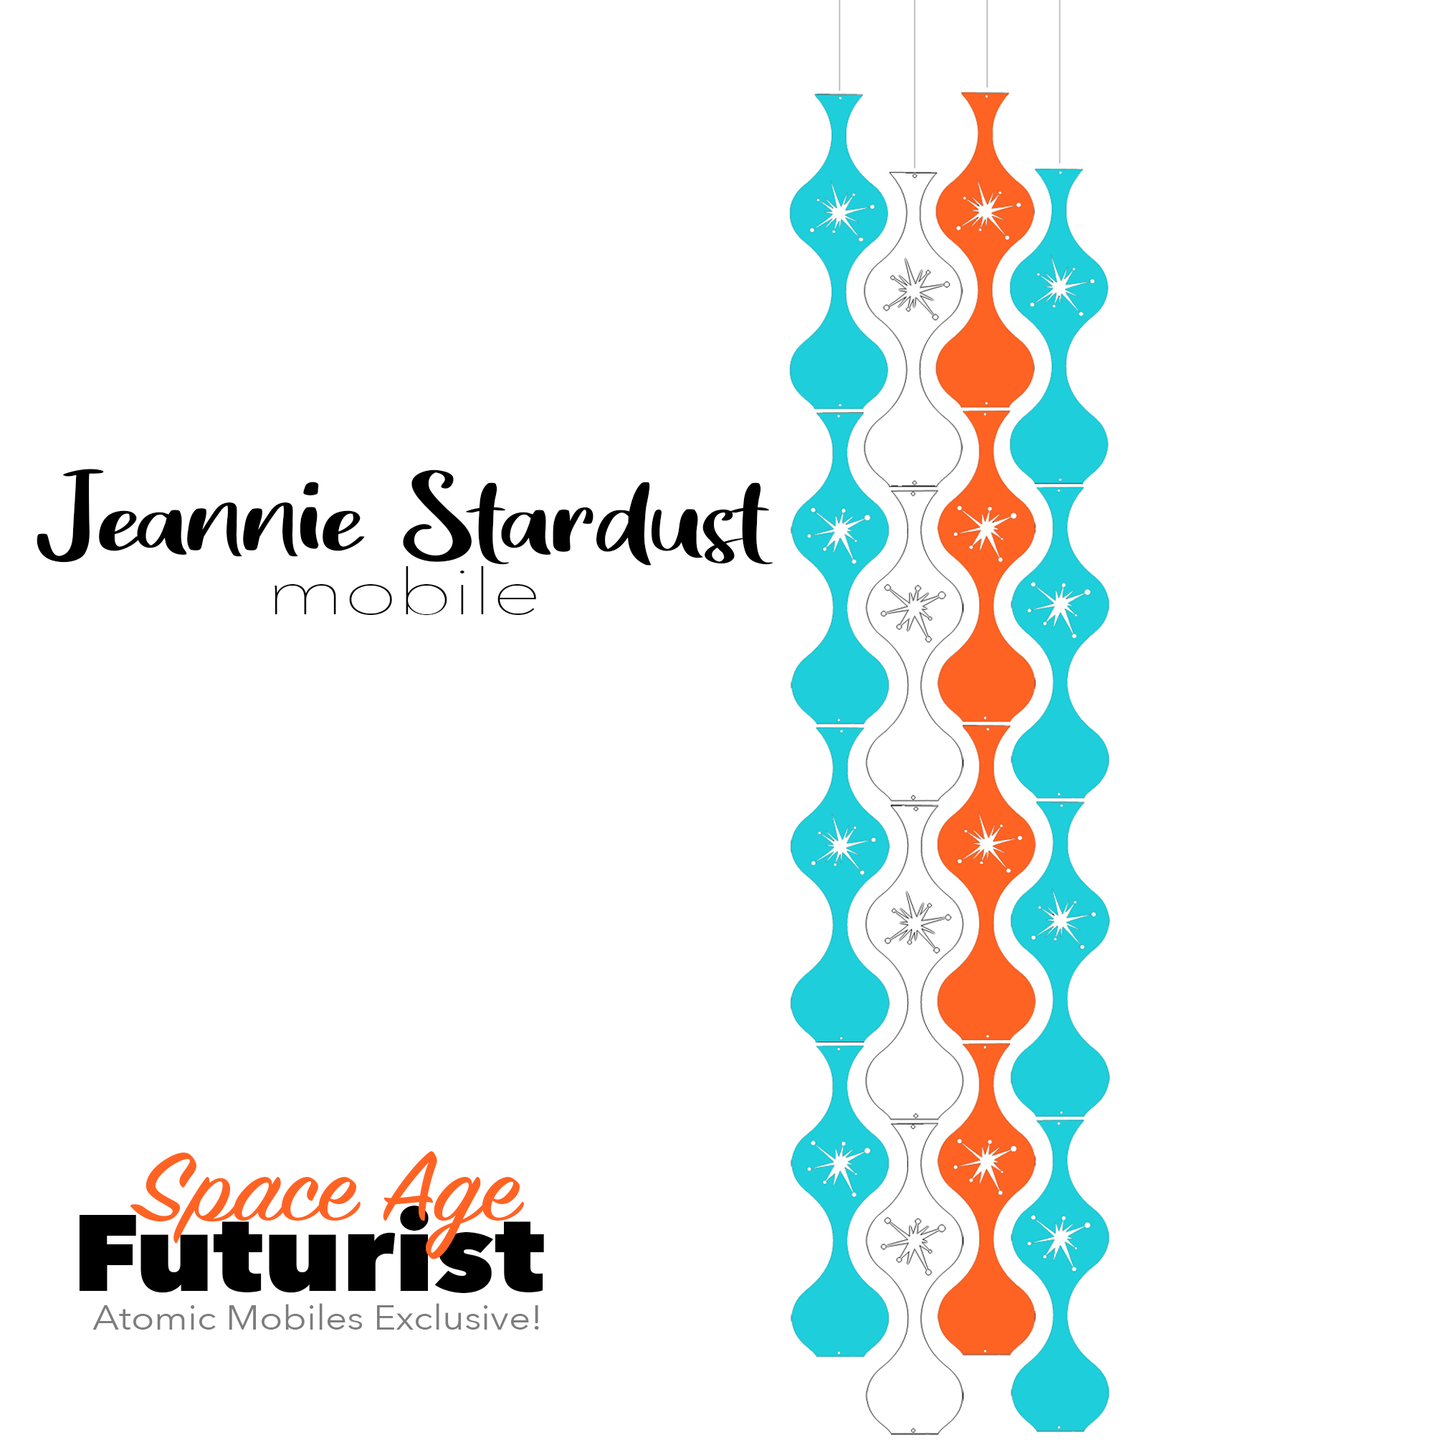 Space Age Futurist Jeannie Stardust Hanging Art Mobile - mid century modern home decor in Aqua White and Orange - by AtomicMobiles.com